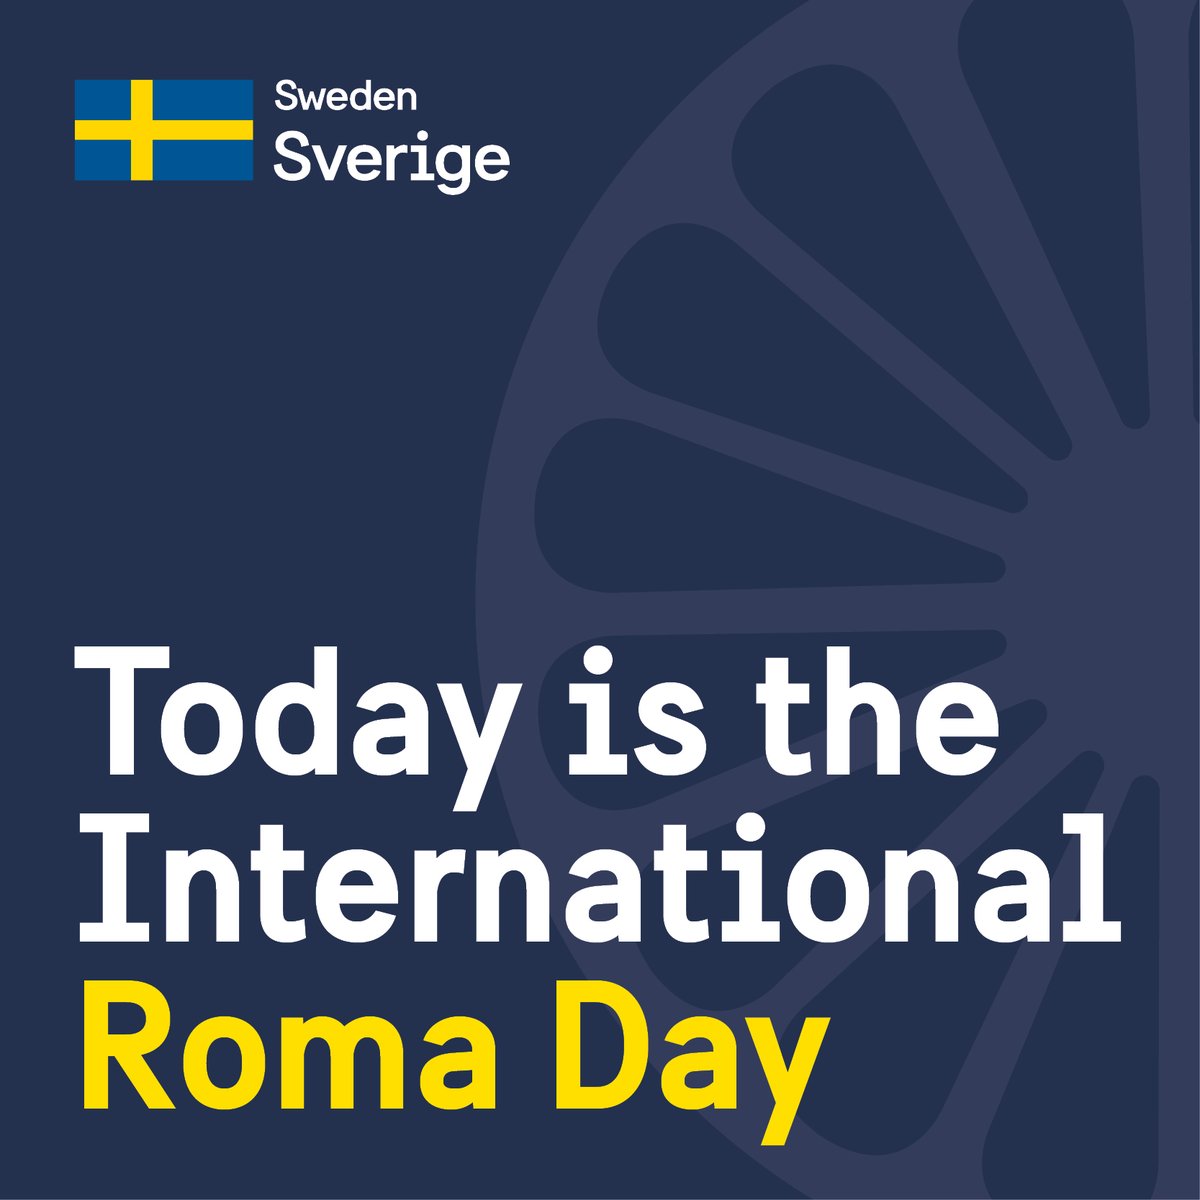 Today is #InternationalRomaDay. Sweden is working to ensure that the Roma have the same opportunities in life as everyone else and to combat antigypsyism. Read more about the Government’s efforts here ⬇️ government.se/information-ma…